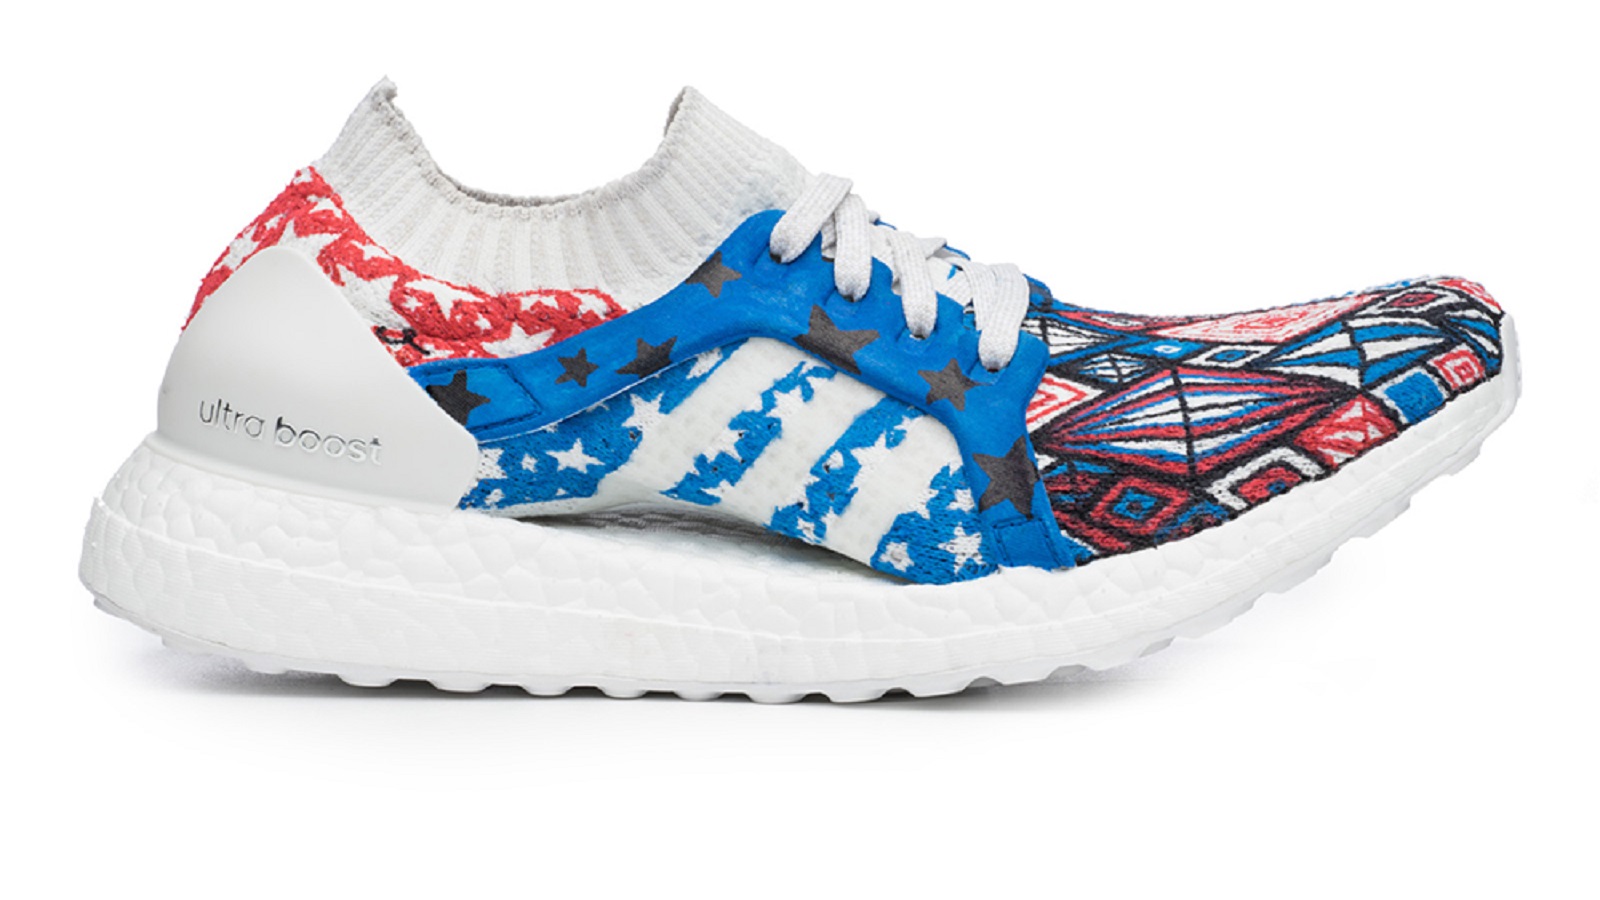 4th of july adidas shoes